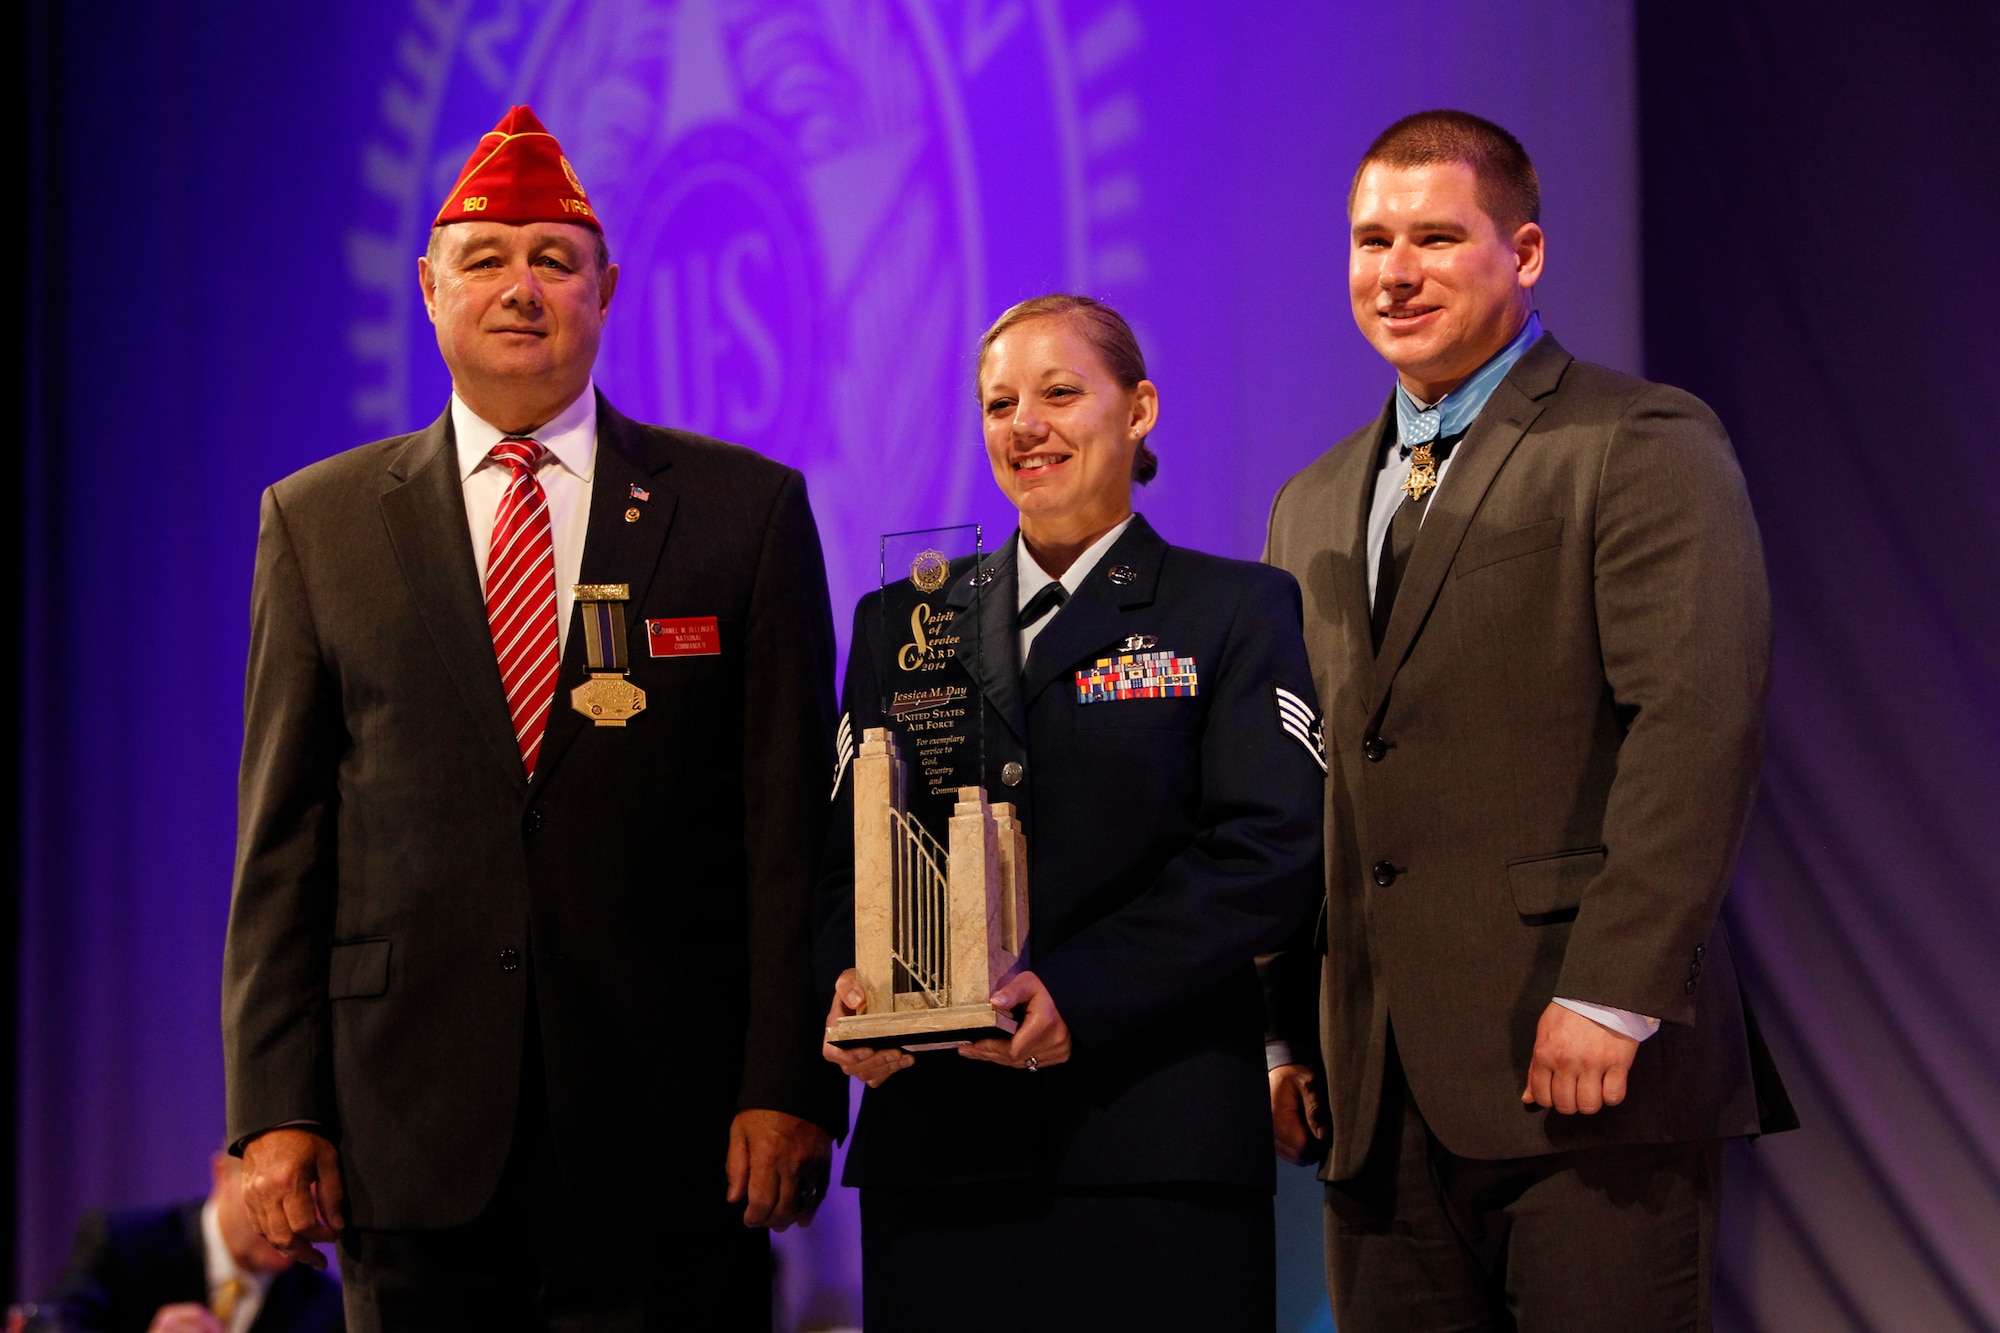 Staff Sgt. Jessica M. Day smiles for a photo after receiving the American Legion Spirit of Service Award at the Legion’s National Convention Aug. 26, 2014, in Charlotte, North Carolina. The award is sponsored by the National Headquarters of the American Legion and is presented annually to an enlisted member from each of the military services for outstanding volunteer service performed off-duty in the local community. Day is a 366th Operations Support Squadron air traffic control craftsman  (Courtesy photo)